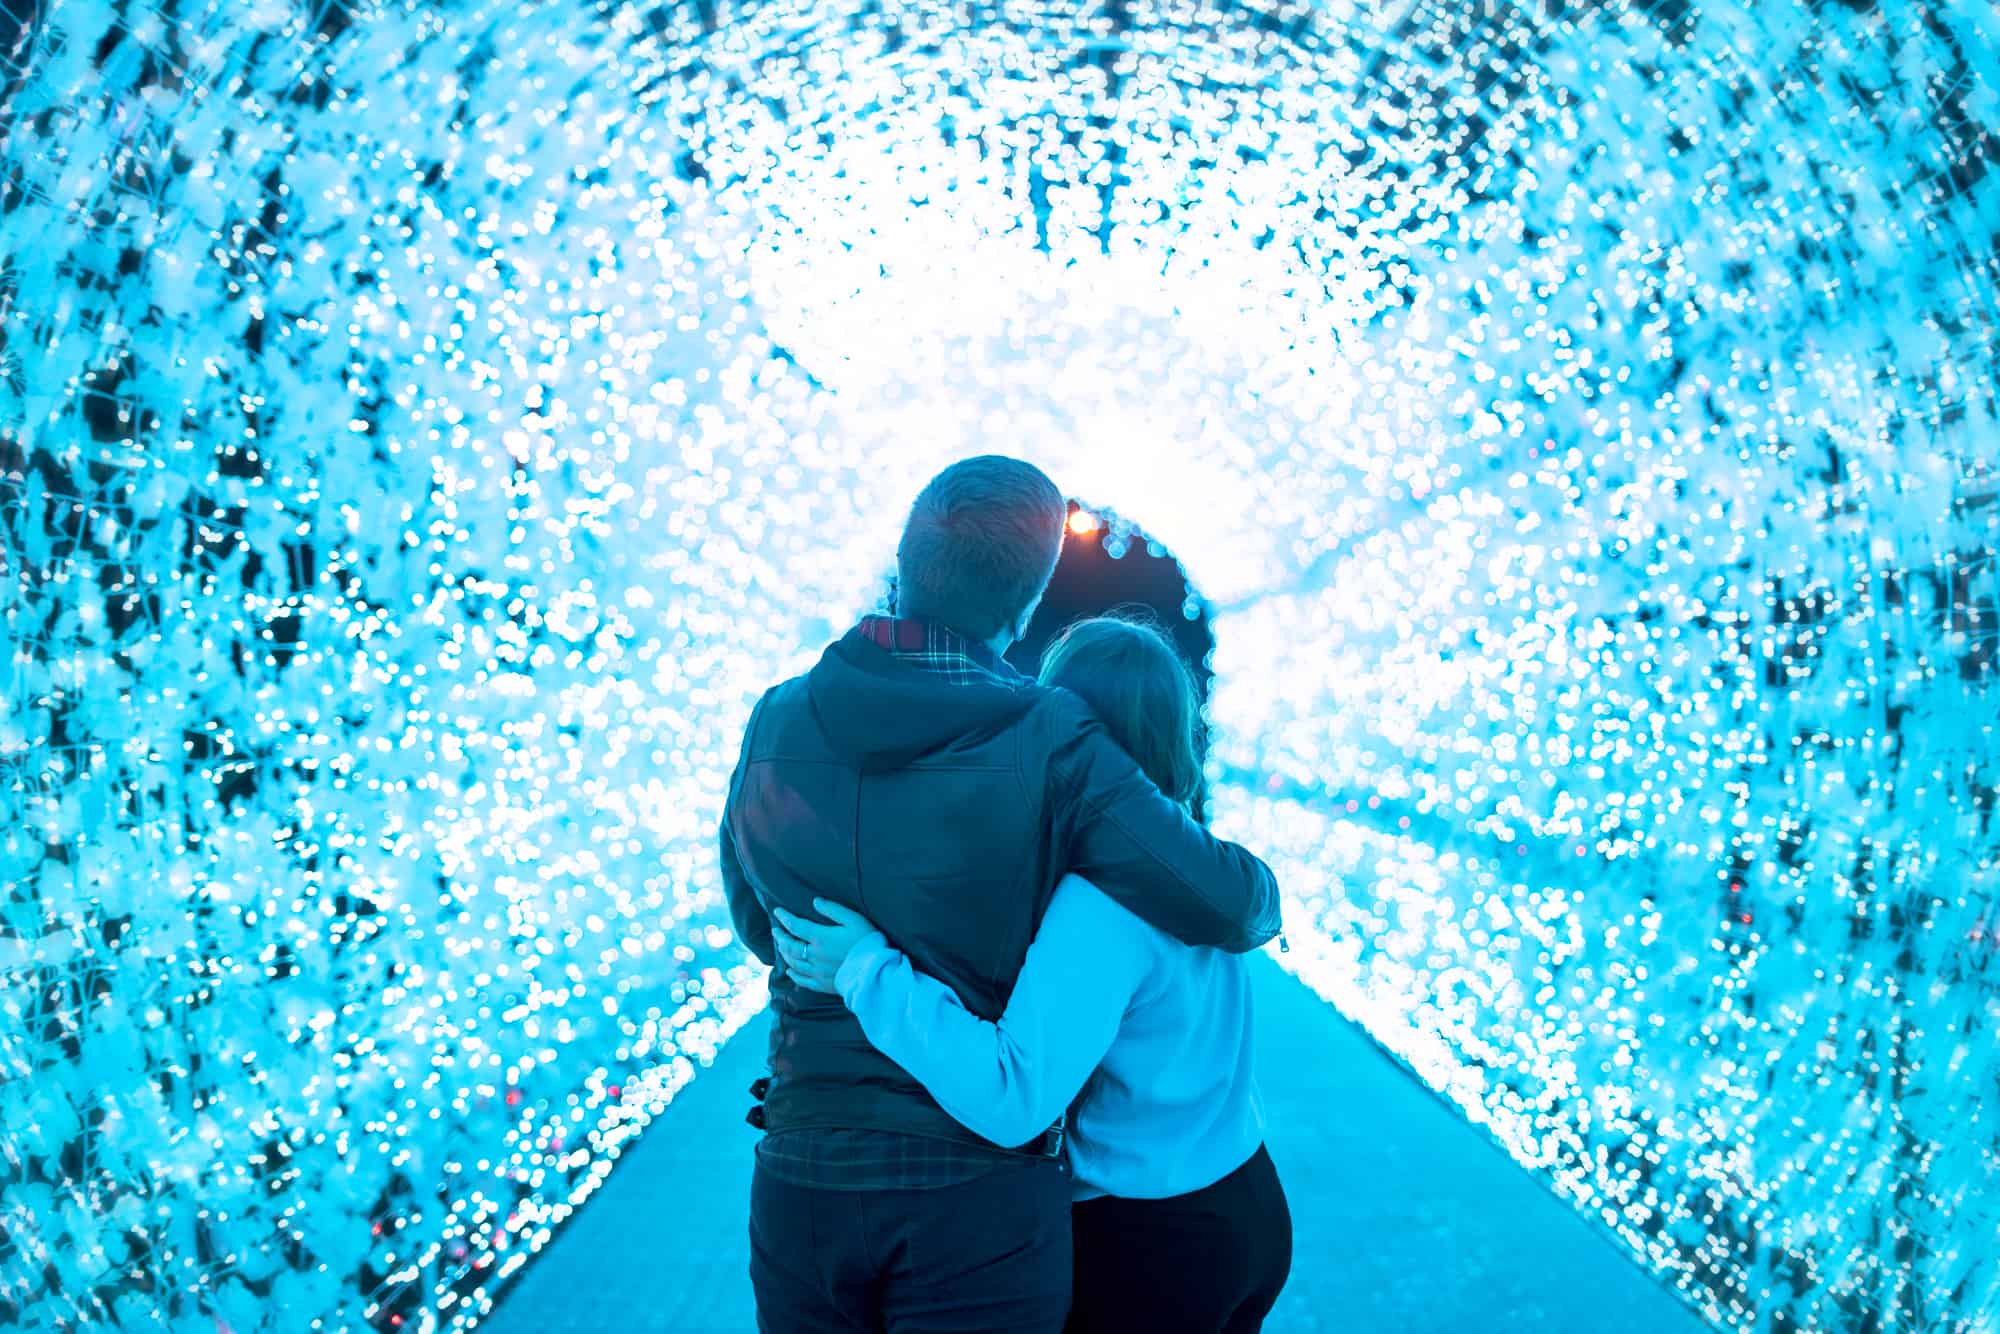 Have a dazzling date night in the GTA at illumi – The largest light, sound and multimedia show in the world